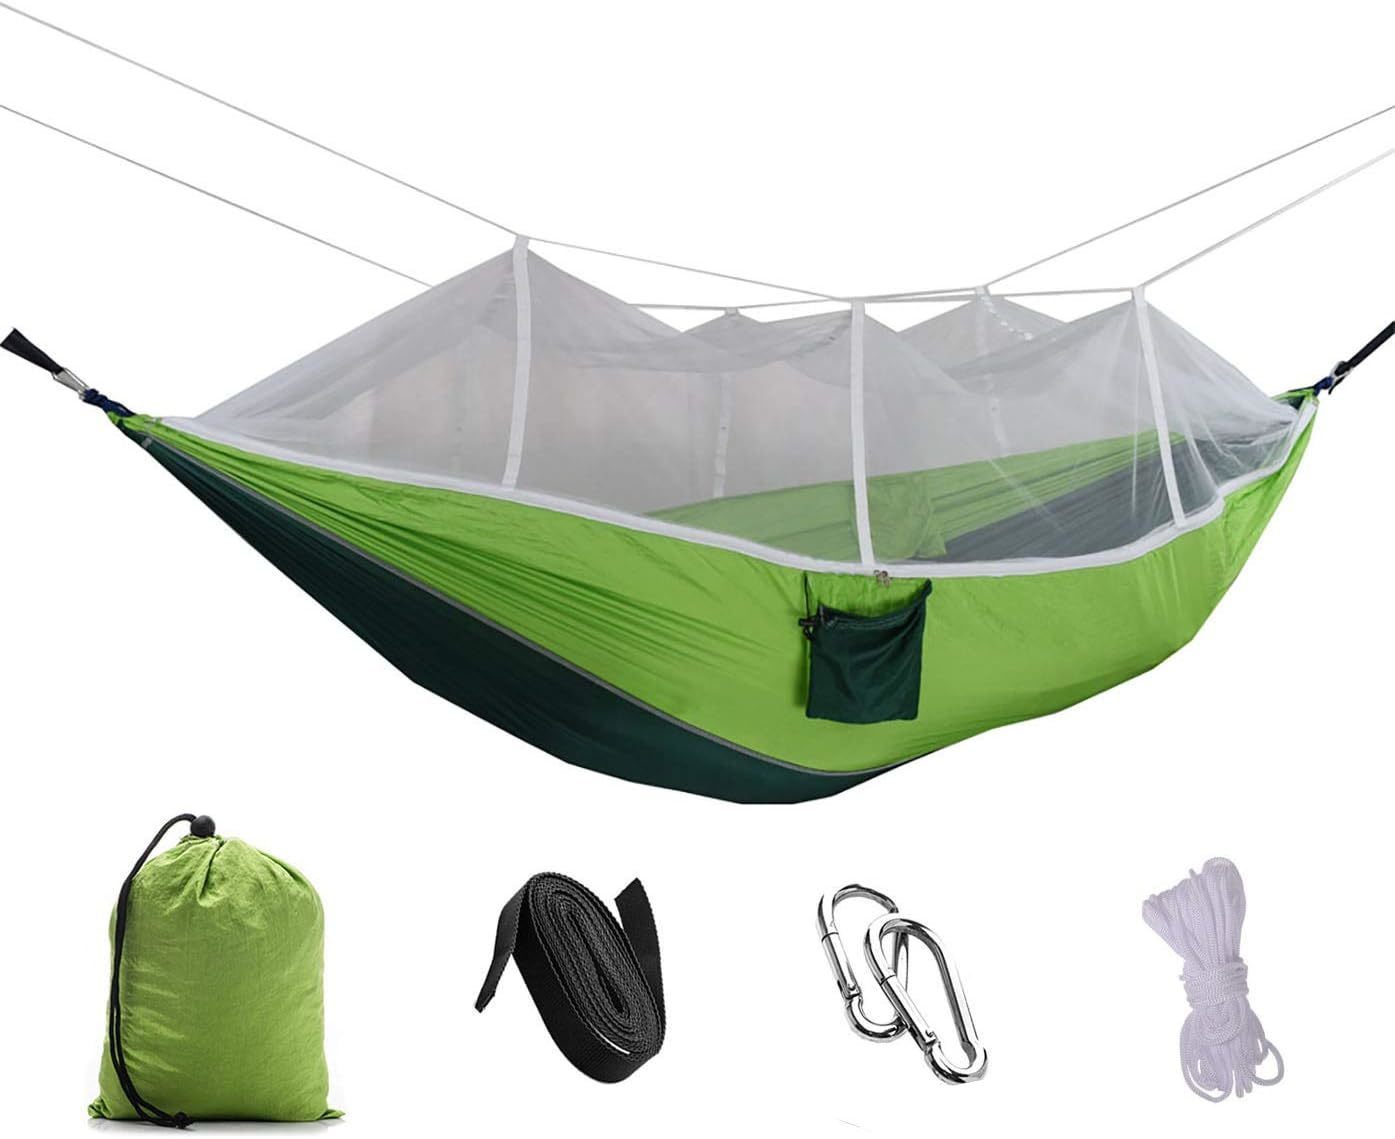 Primary image for Double Camp Hammock With Mosquito Net, Ultra Light Parachute Fabric, Hiking